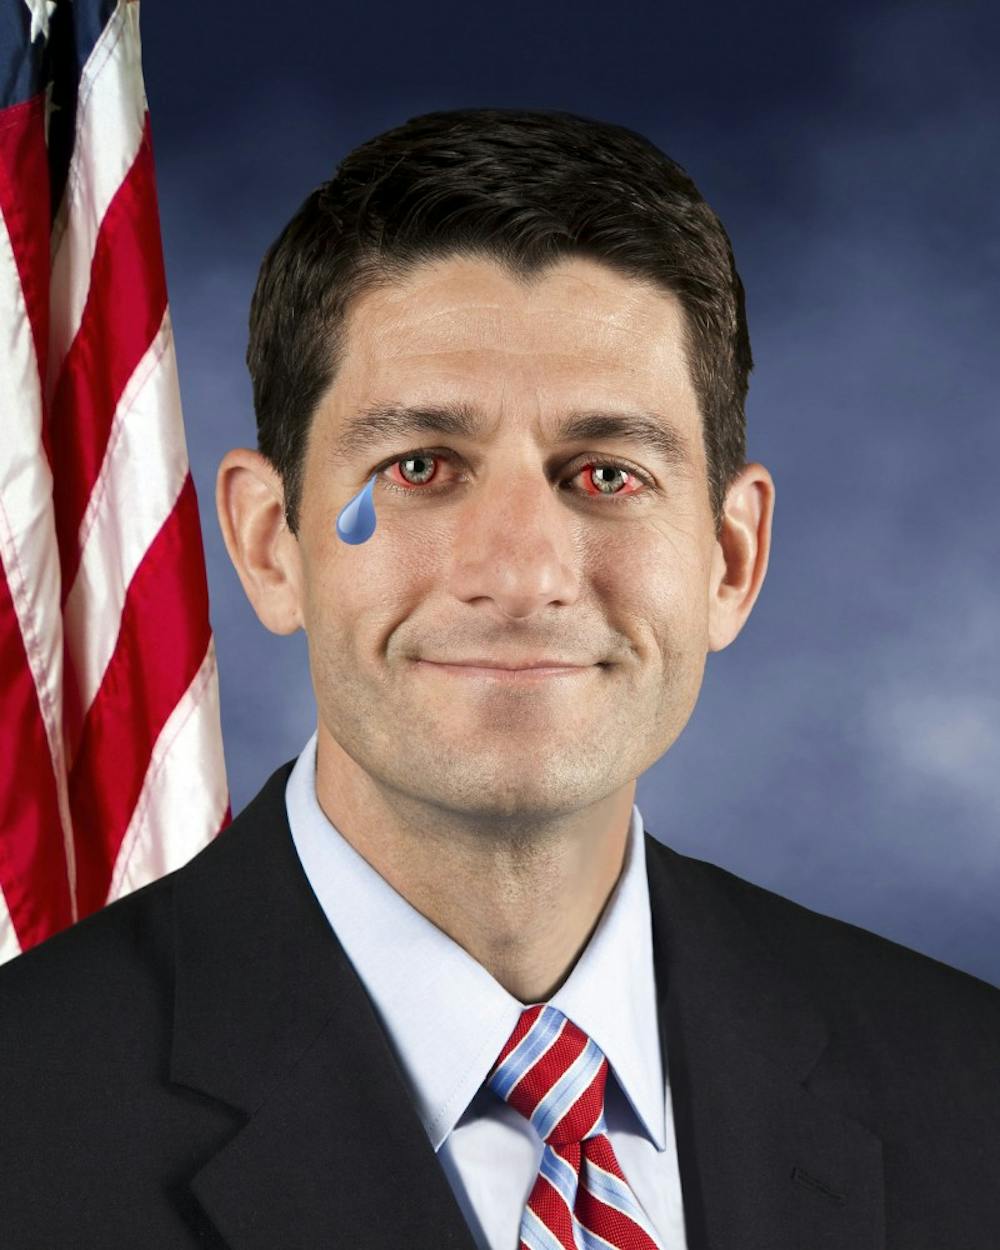 Paul Ryan isn't crying. He doesn't know why you would think that. You jerk.